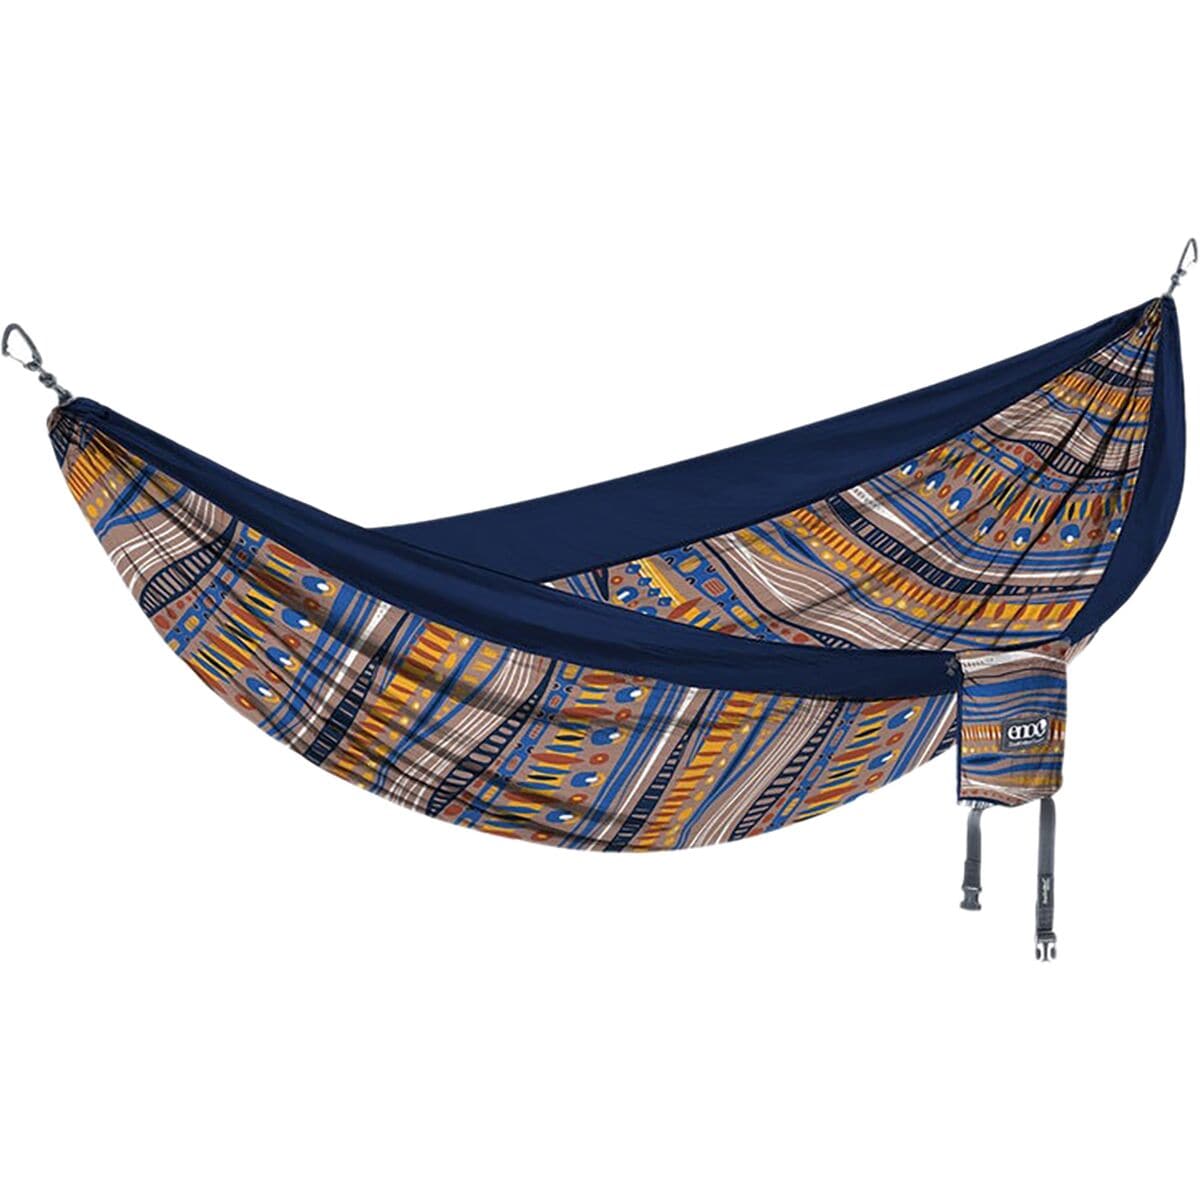 Eagles Nest Outfitters DoubleNest Print Hammock